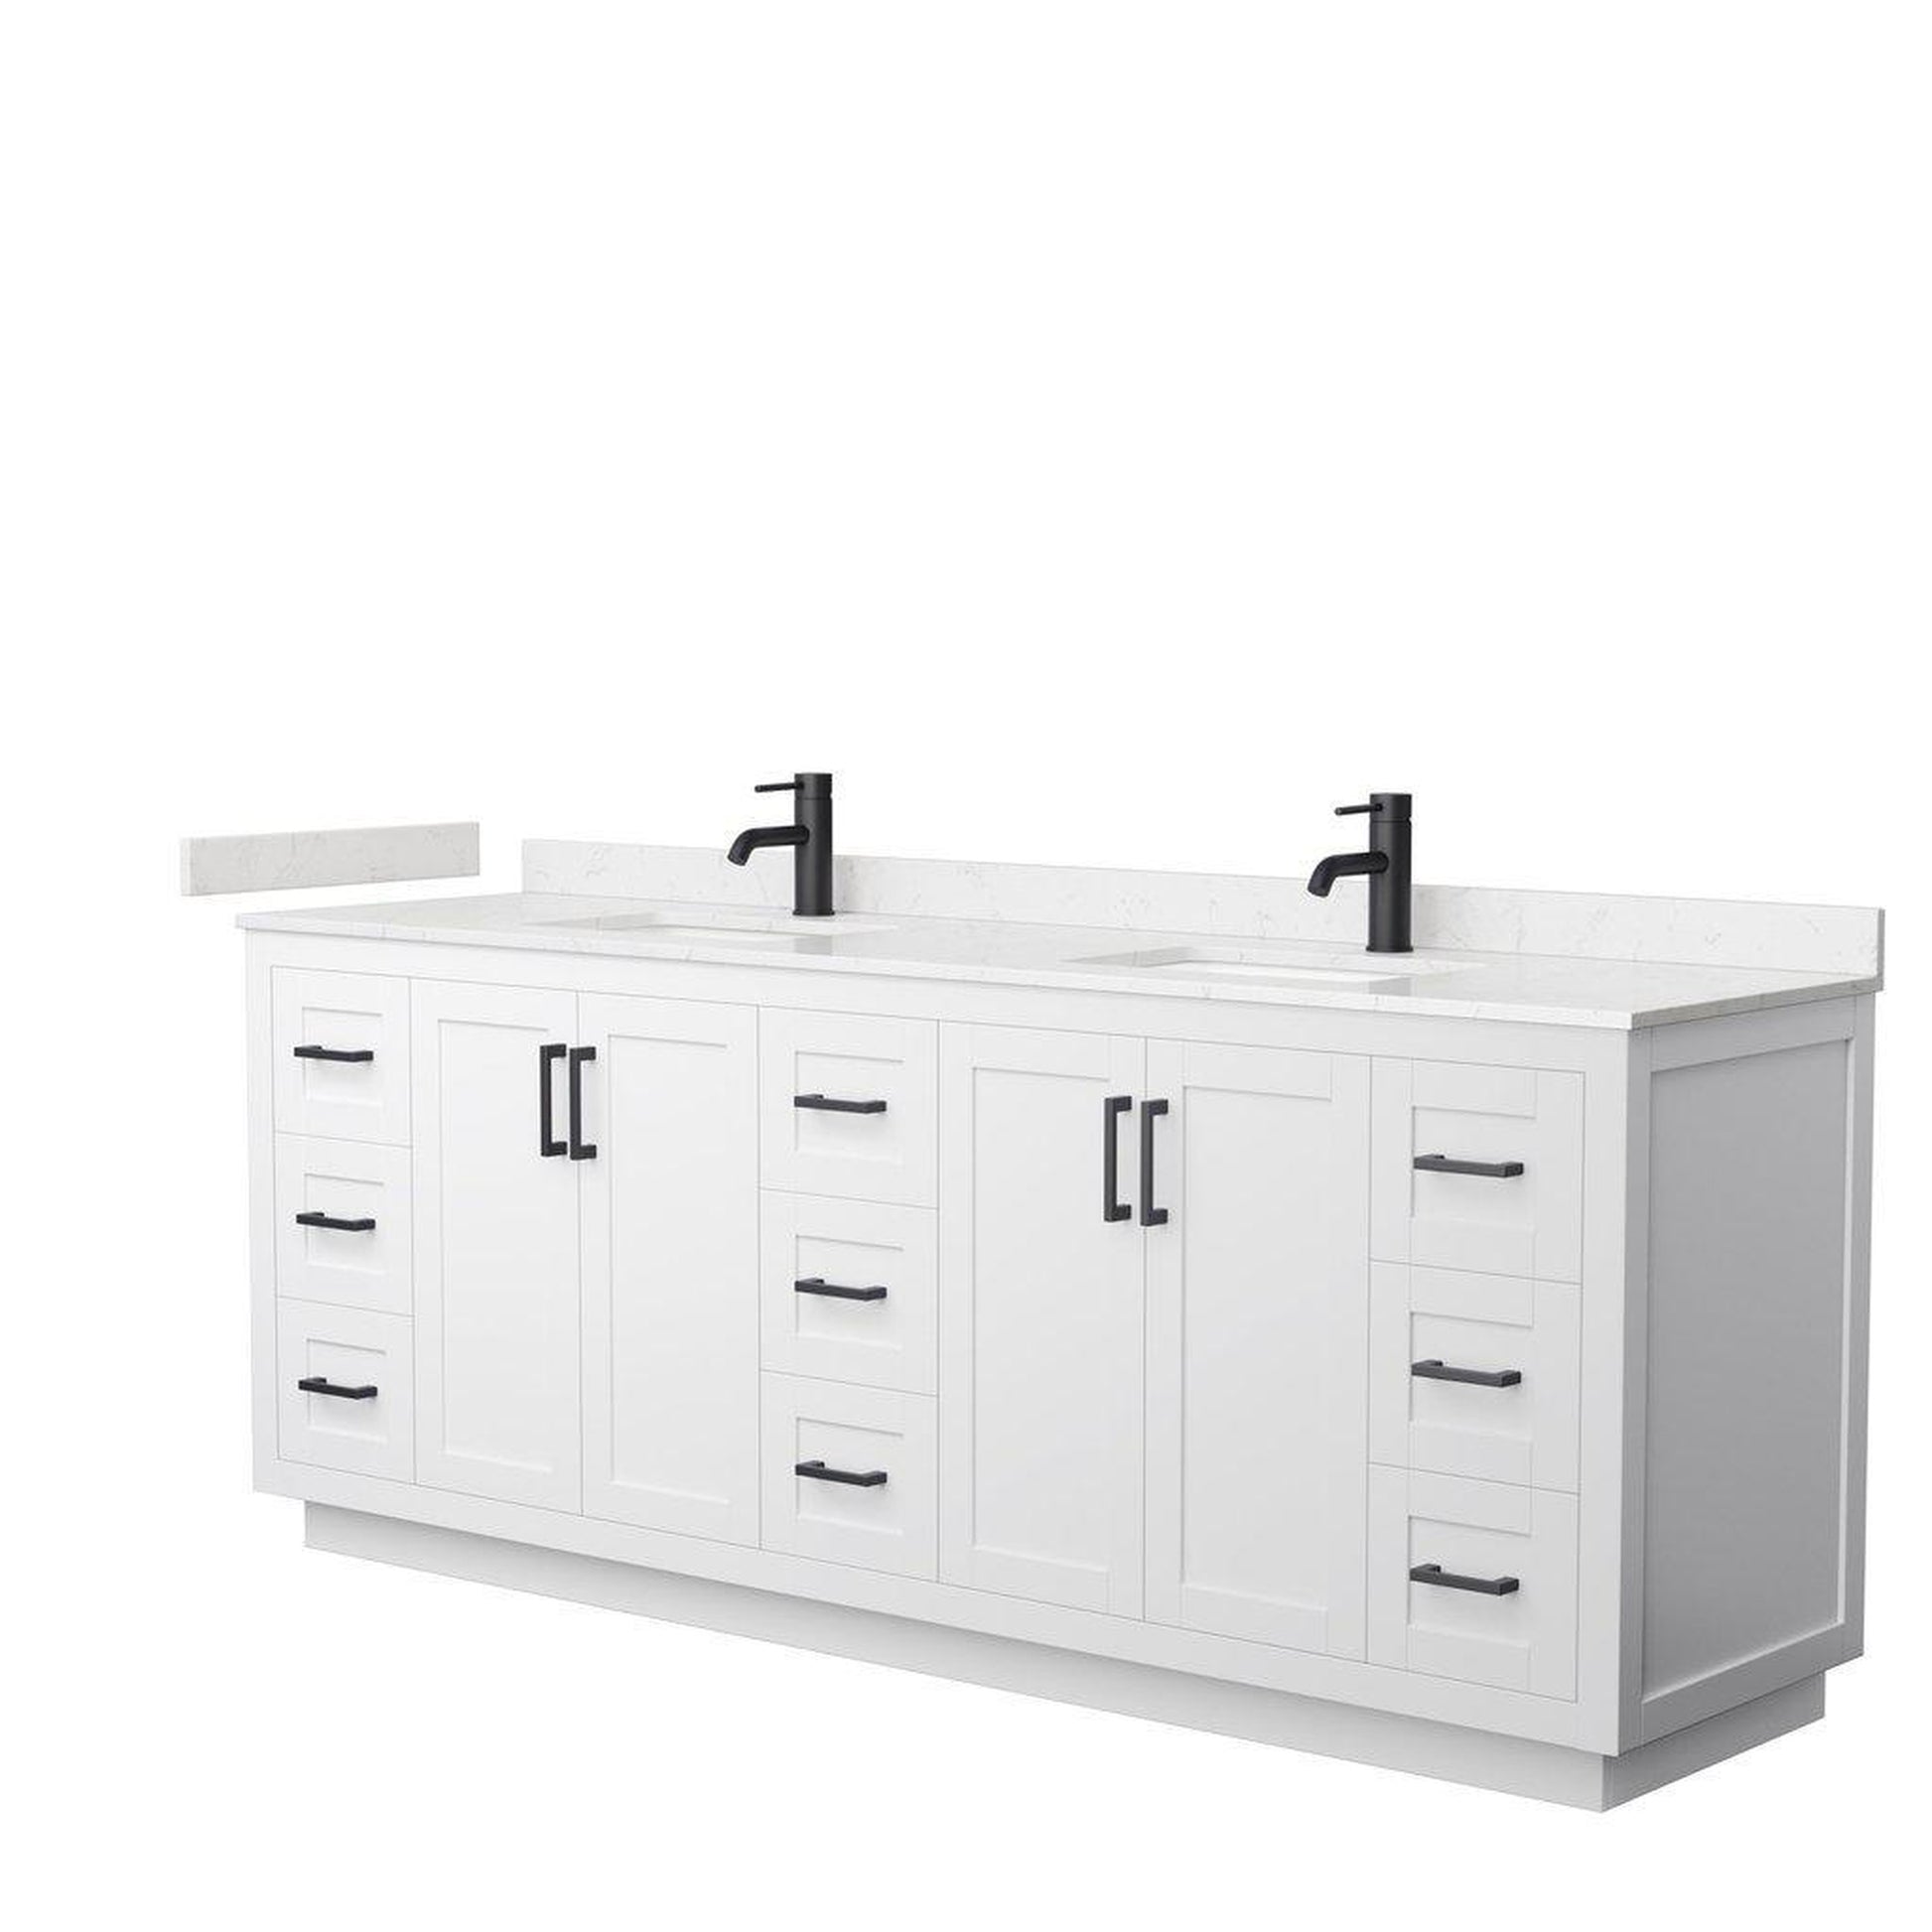 Wyndham Collection Miranda 84" Double Bathroom White Vanity Set With Light-Vein Carrara Cultured Marble Countertop, Undermount Square Sink, And Matte Black Trim